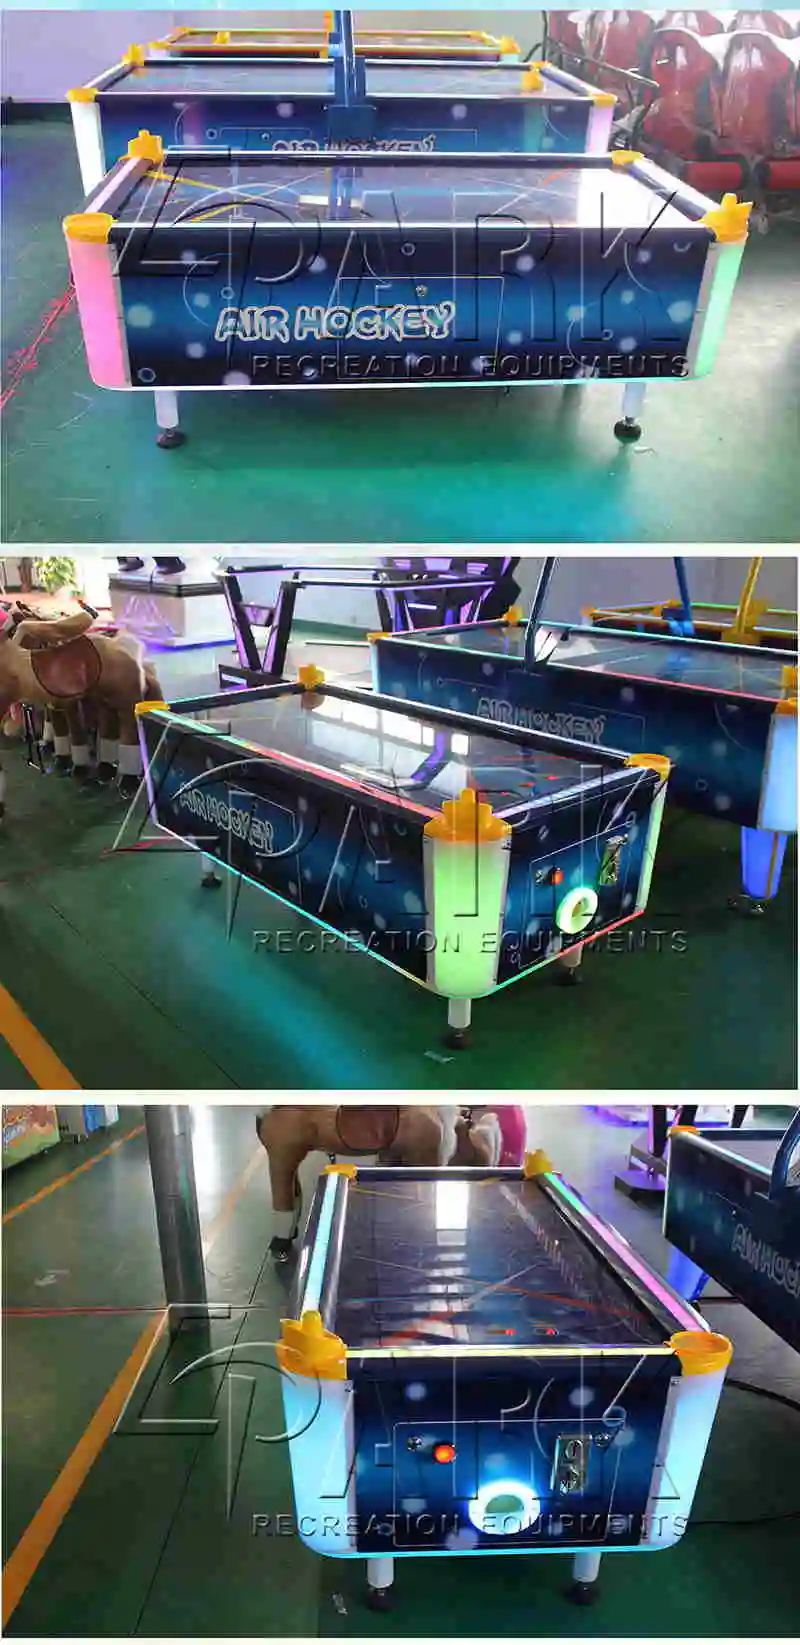 Middle Size Coin-Operate Physical Fitness Amusement Table Tennis Game Machine of Air Hockey